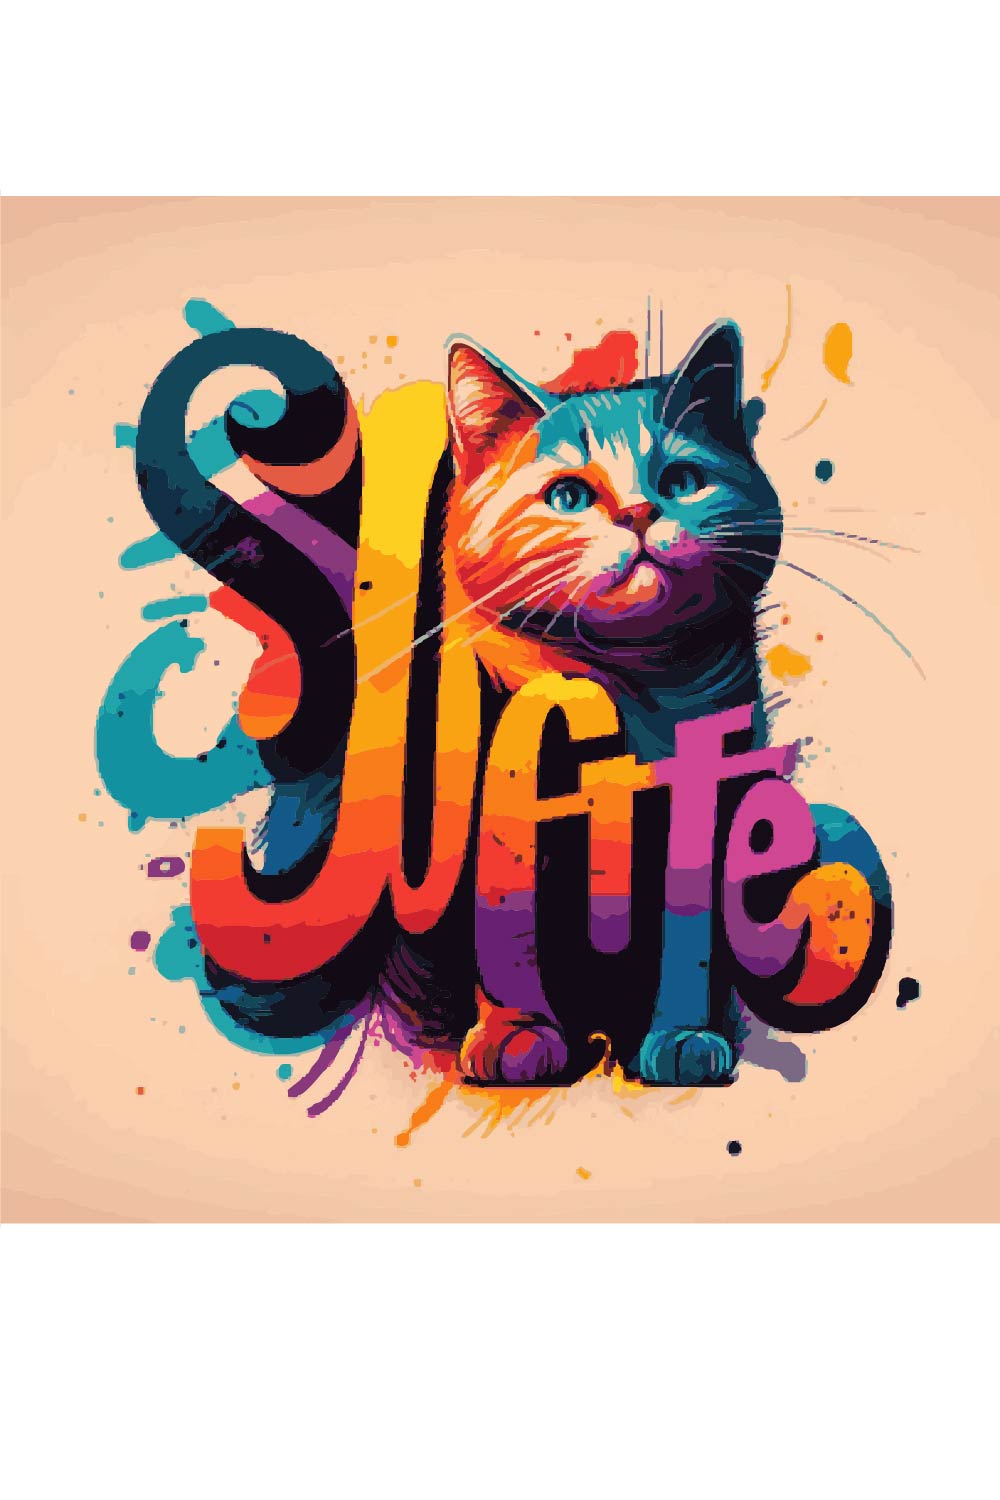 Cat with the word suffee painted on it.